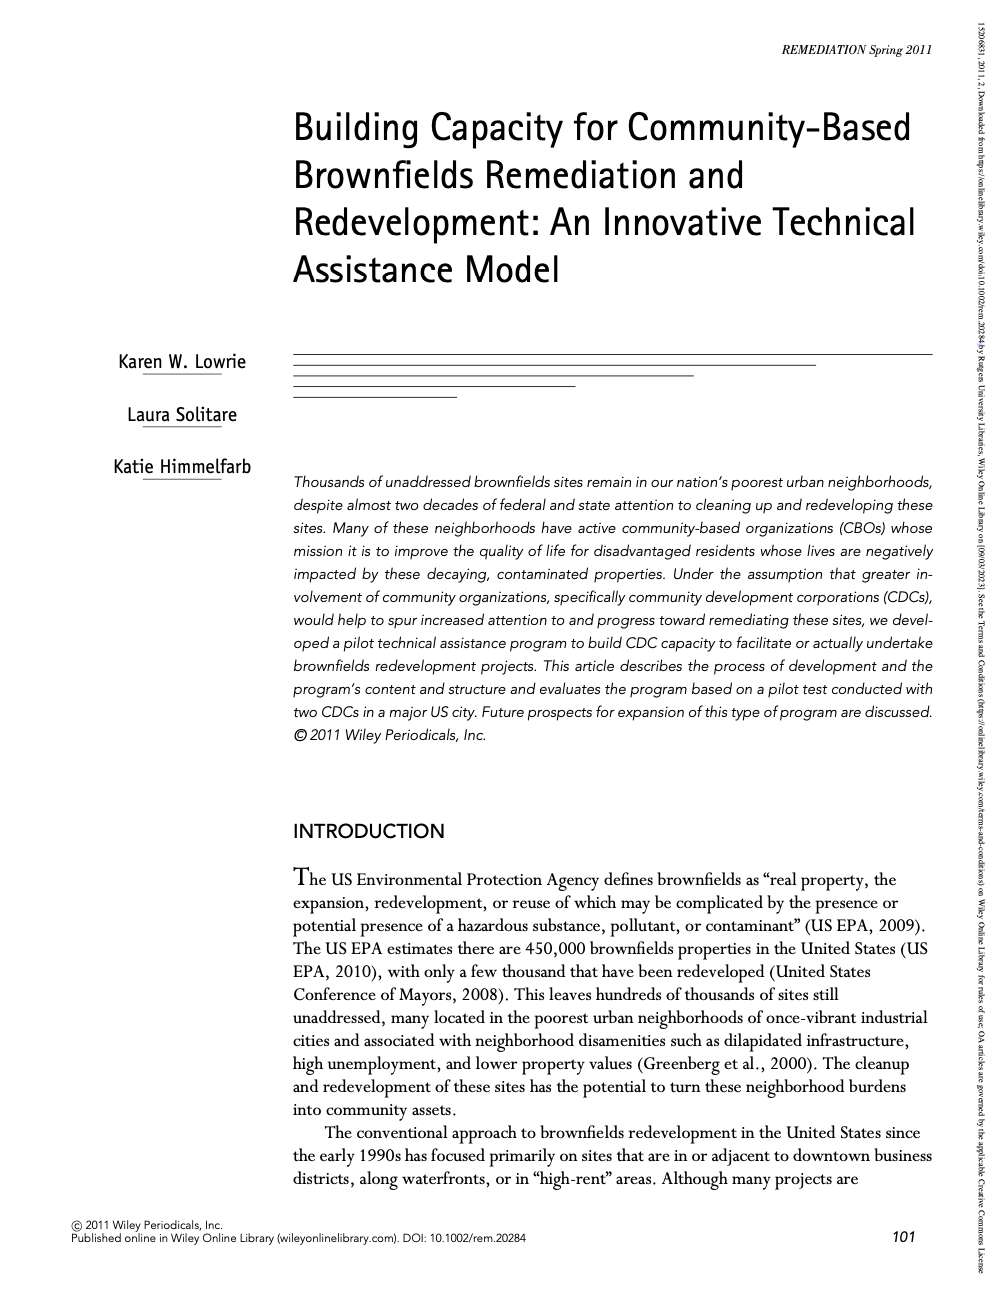 Building Capacity for Community-Based Brownfields Remediation and Redevelopment